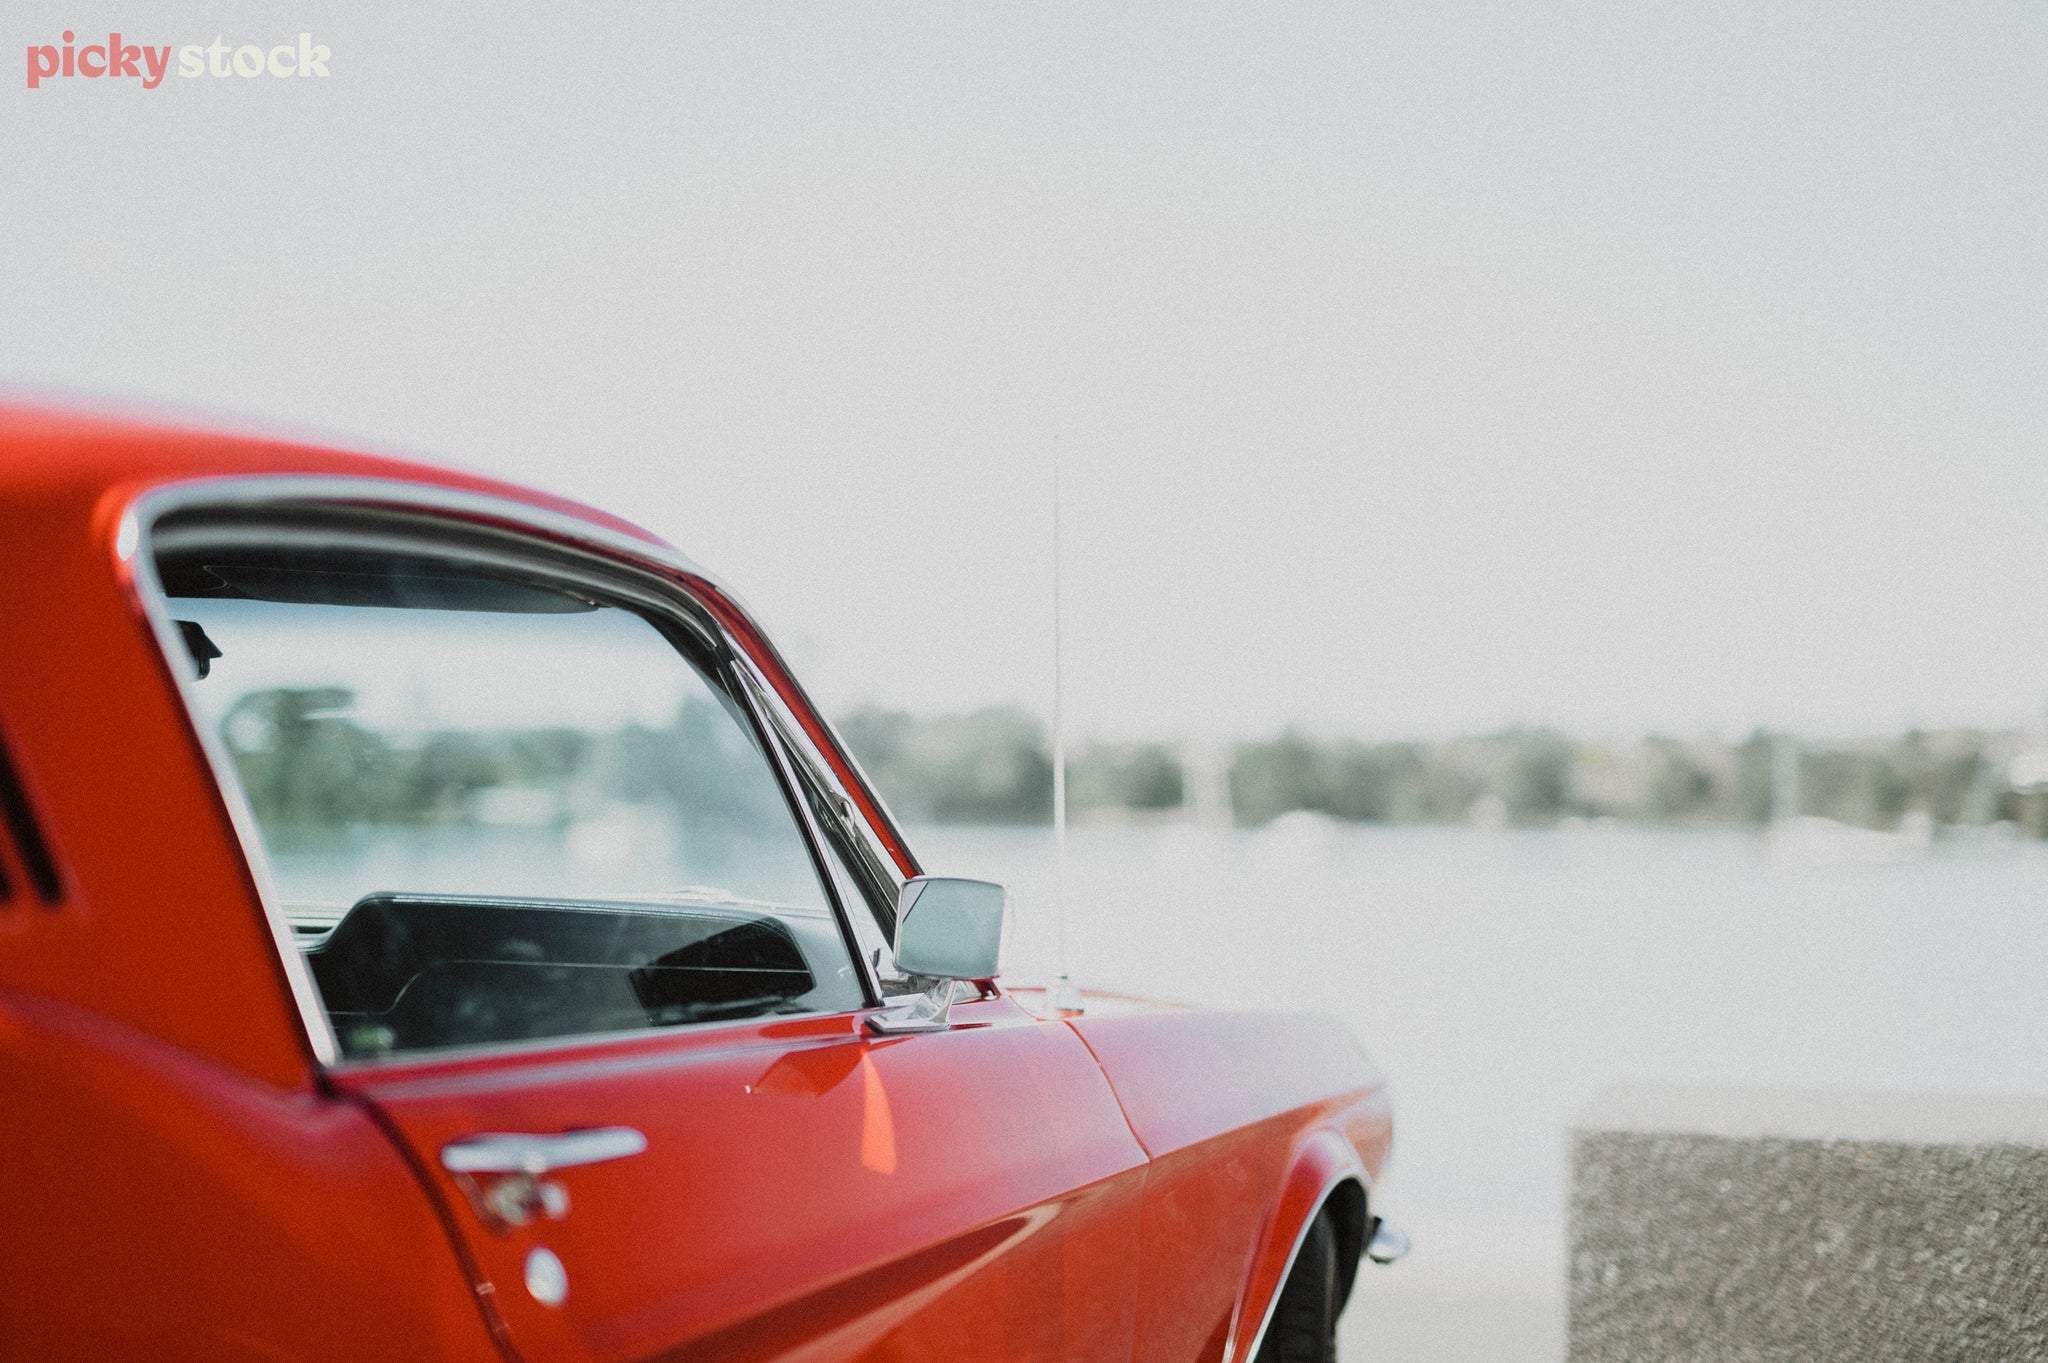 The right hand side of a red Mustang sports car over looking an out of focus harbour.